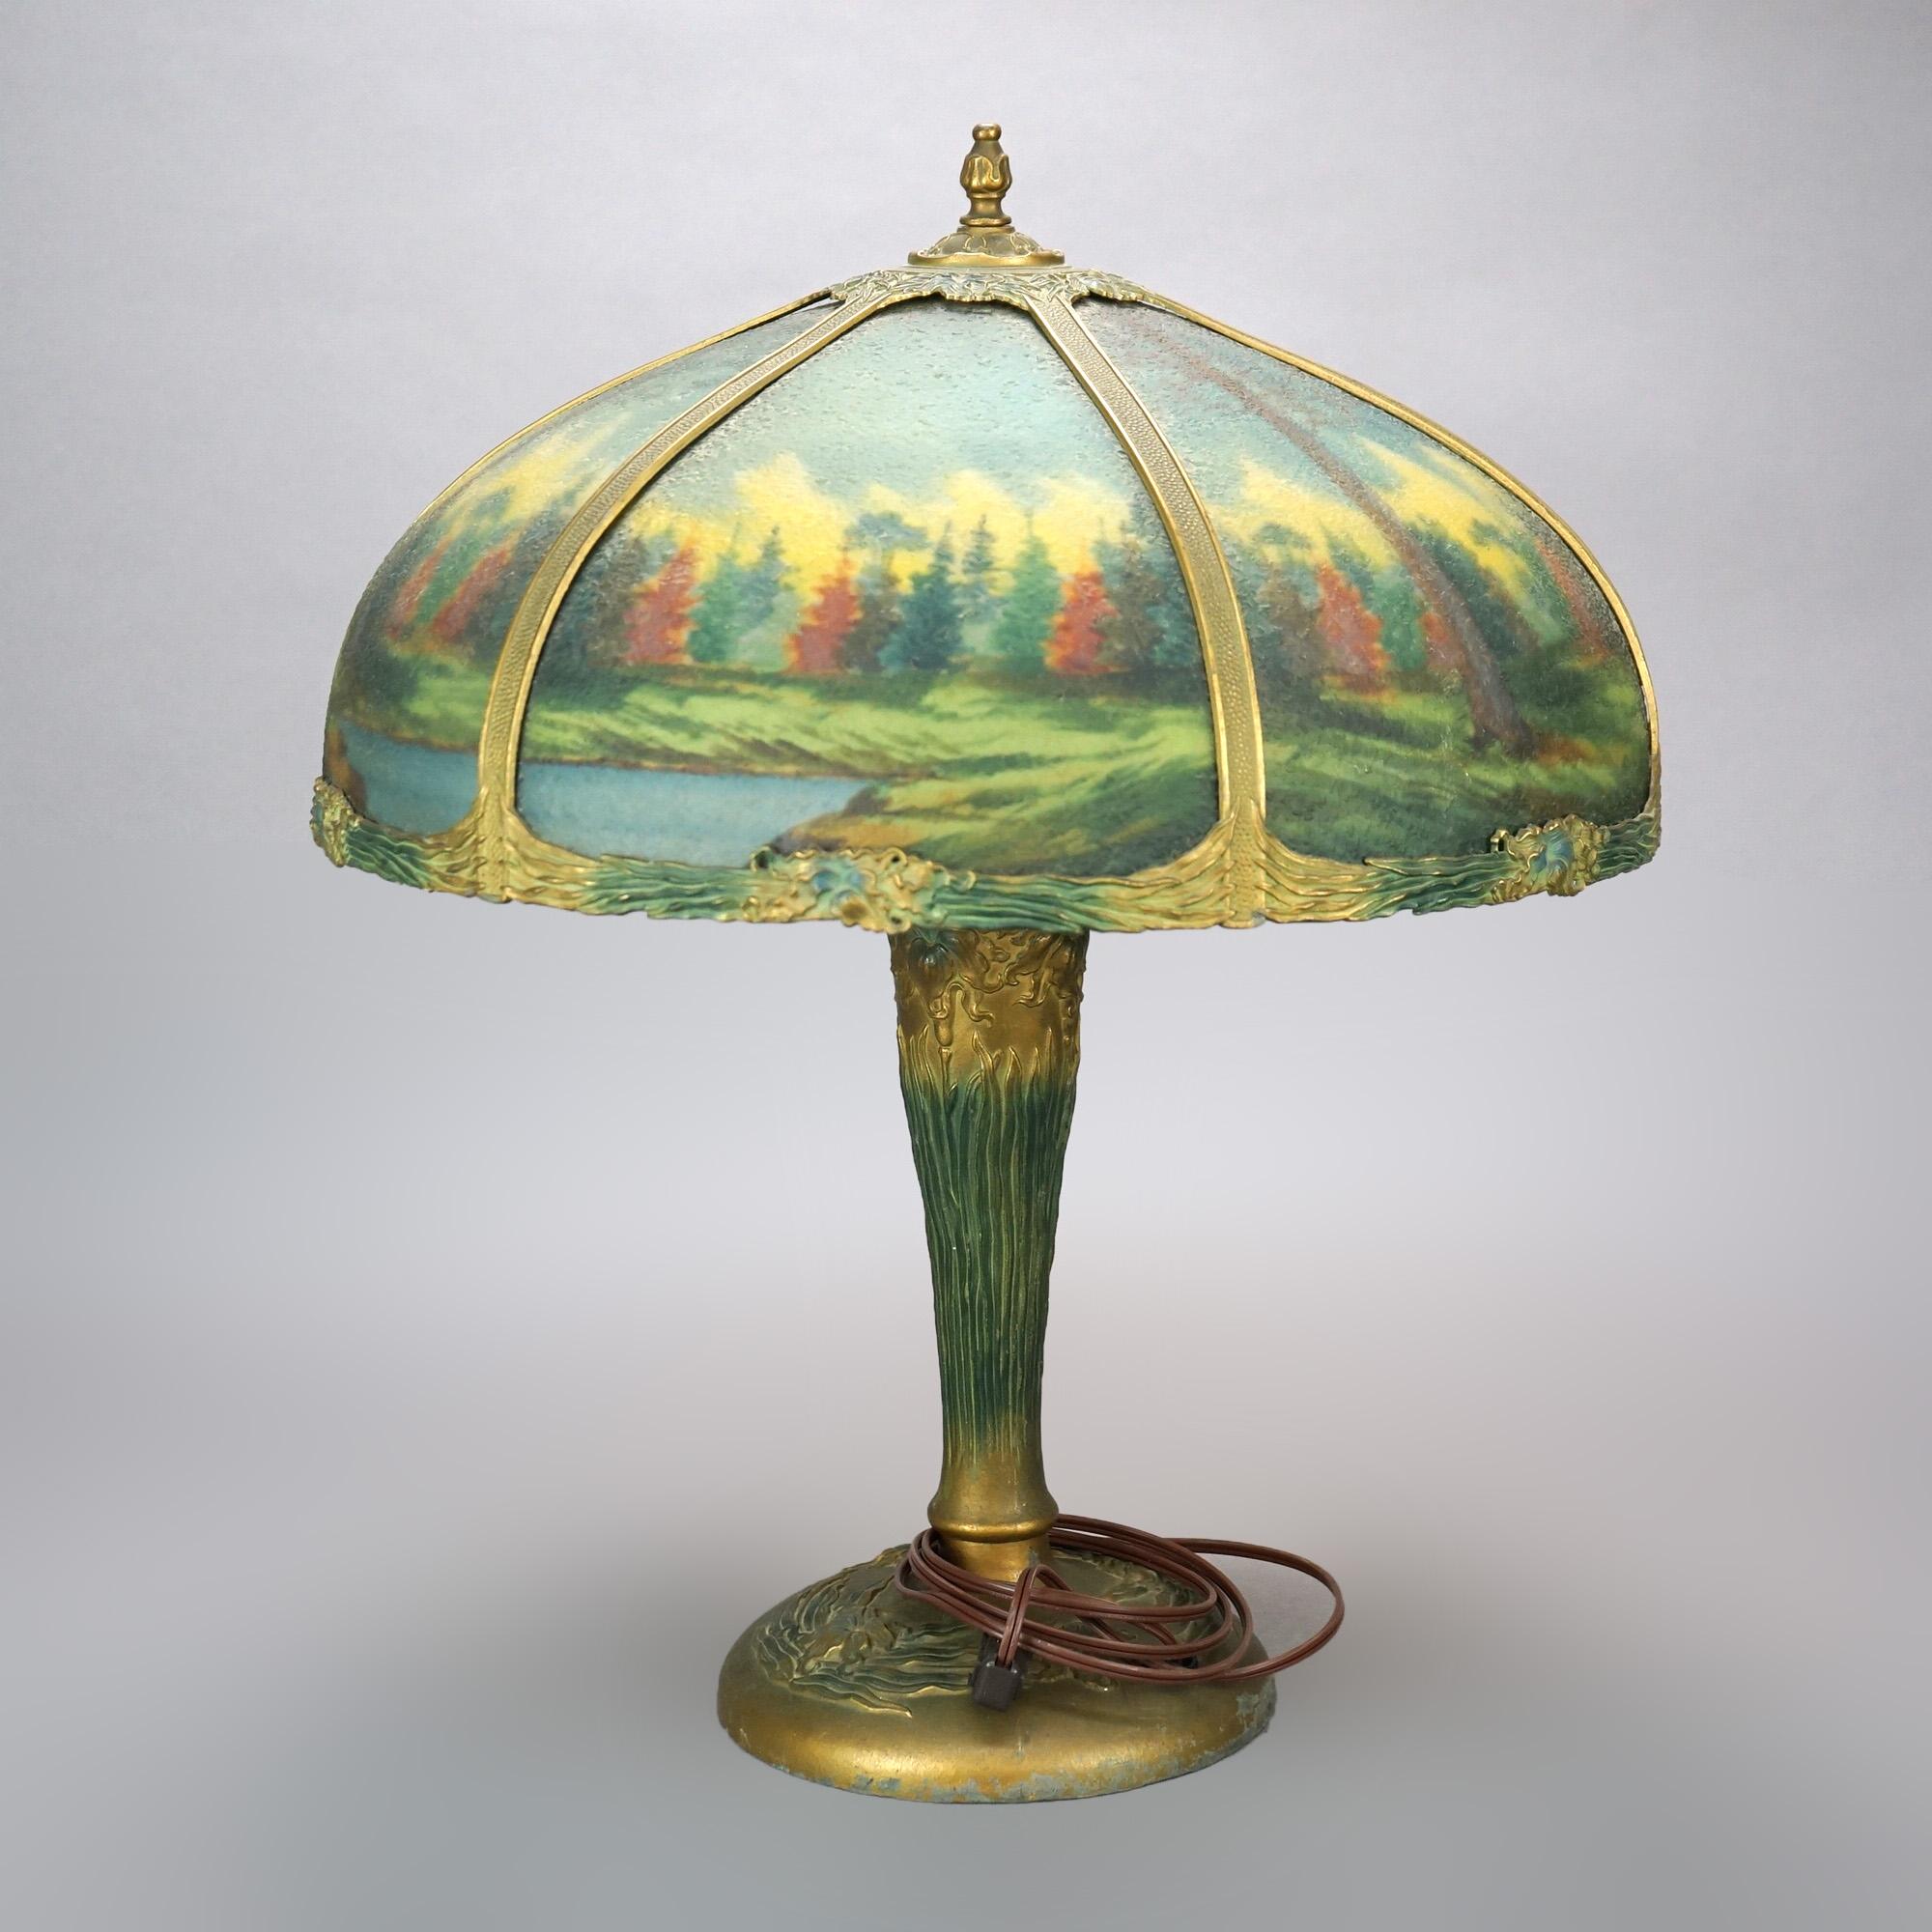 An antique Arts and Crafts table lamp in the manner of Bradley & Hubbard offers polychromed cast double socket base with matching shade housing six reverse painted bent glass panels having landscape lake scene, c1920

Measures - 22